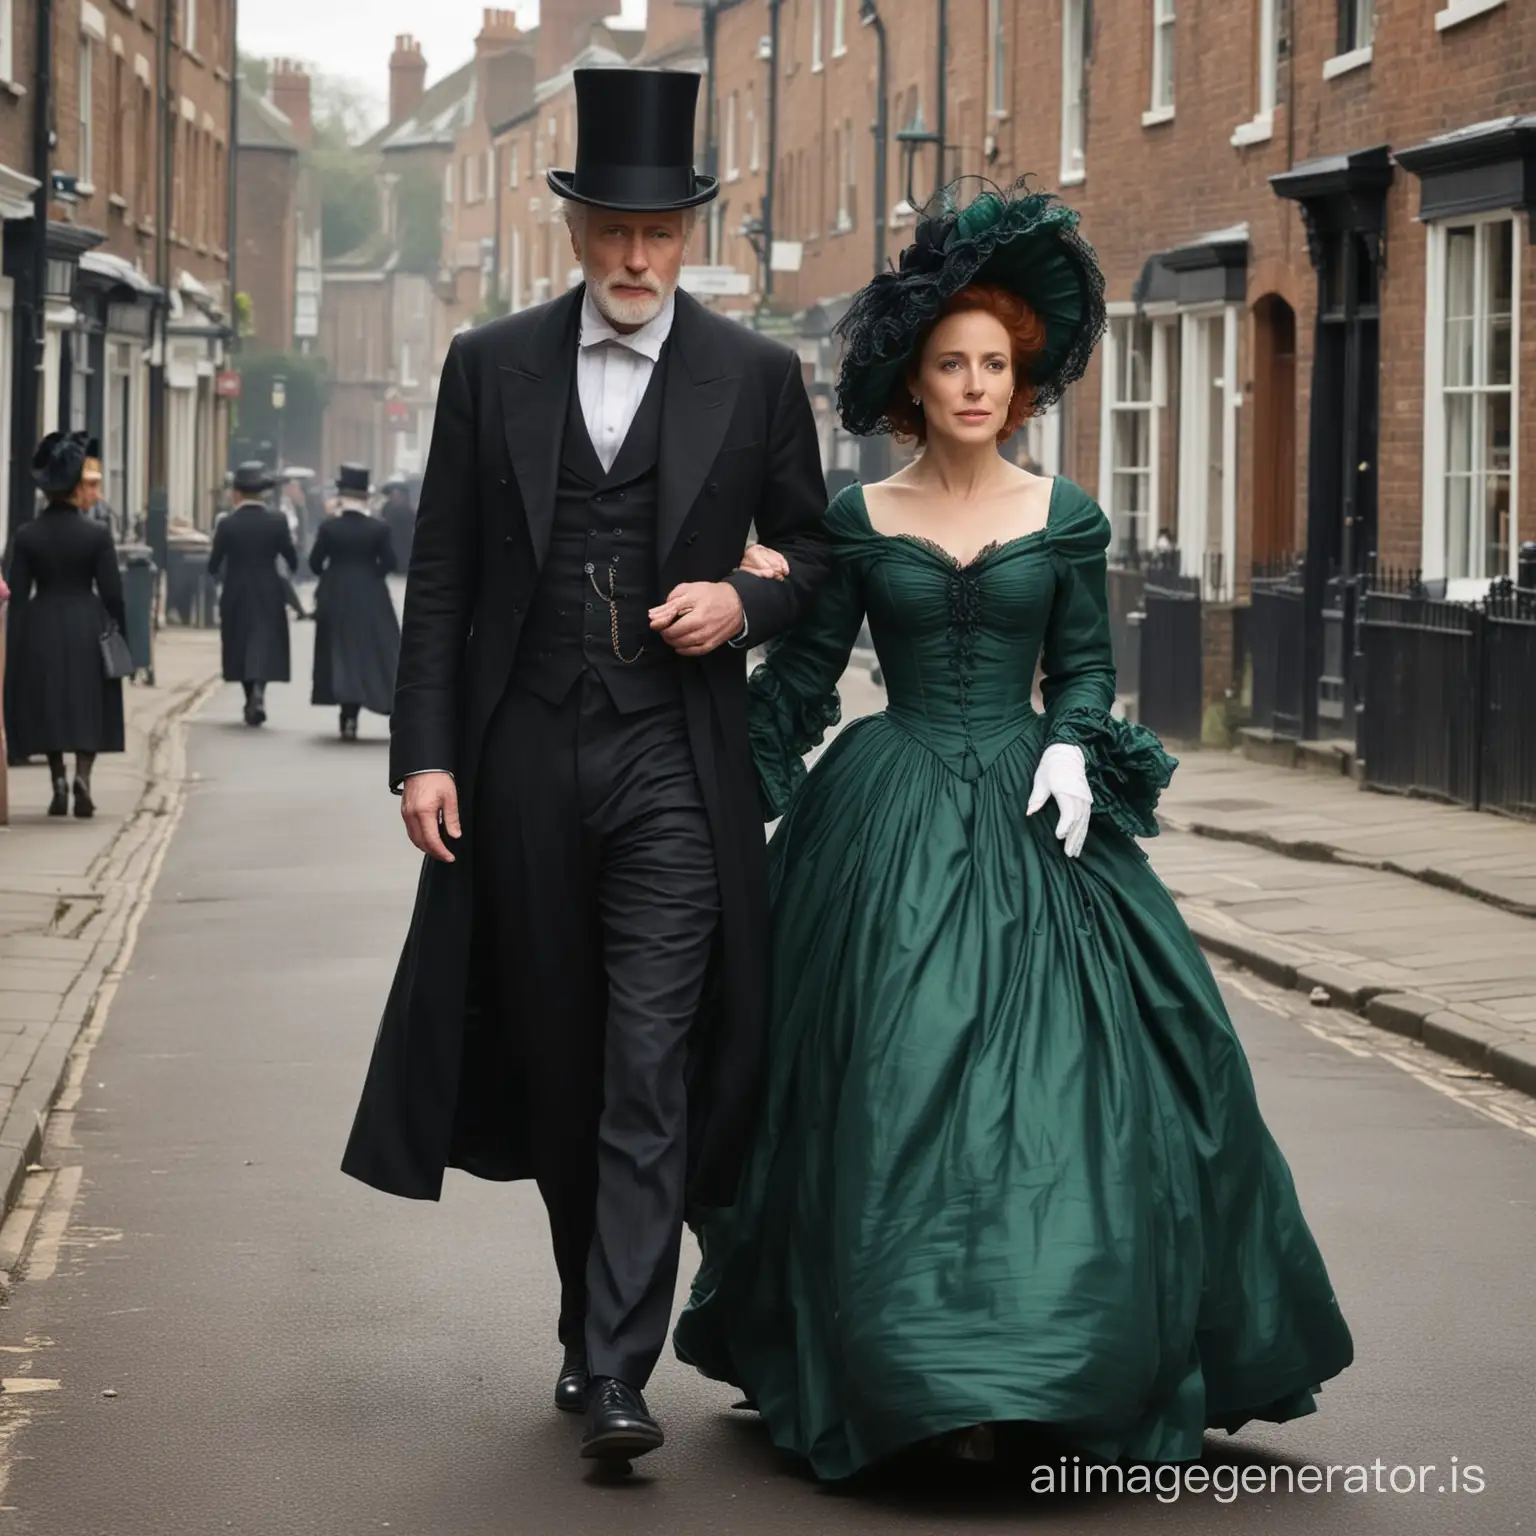 Victorian-Newlyweds-Strolling-the-Historic-Streets-Elegant-RedHaired-Woman-and-Gentleman-in-Victorian-Attire